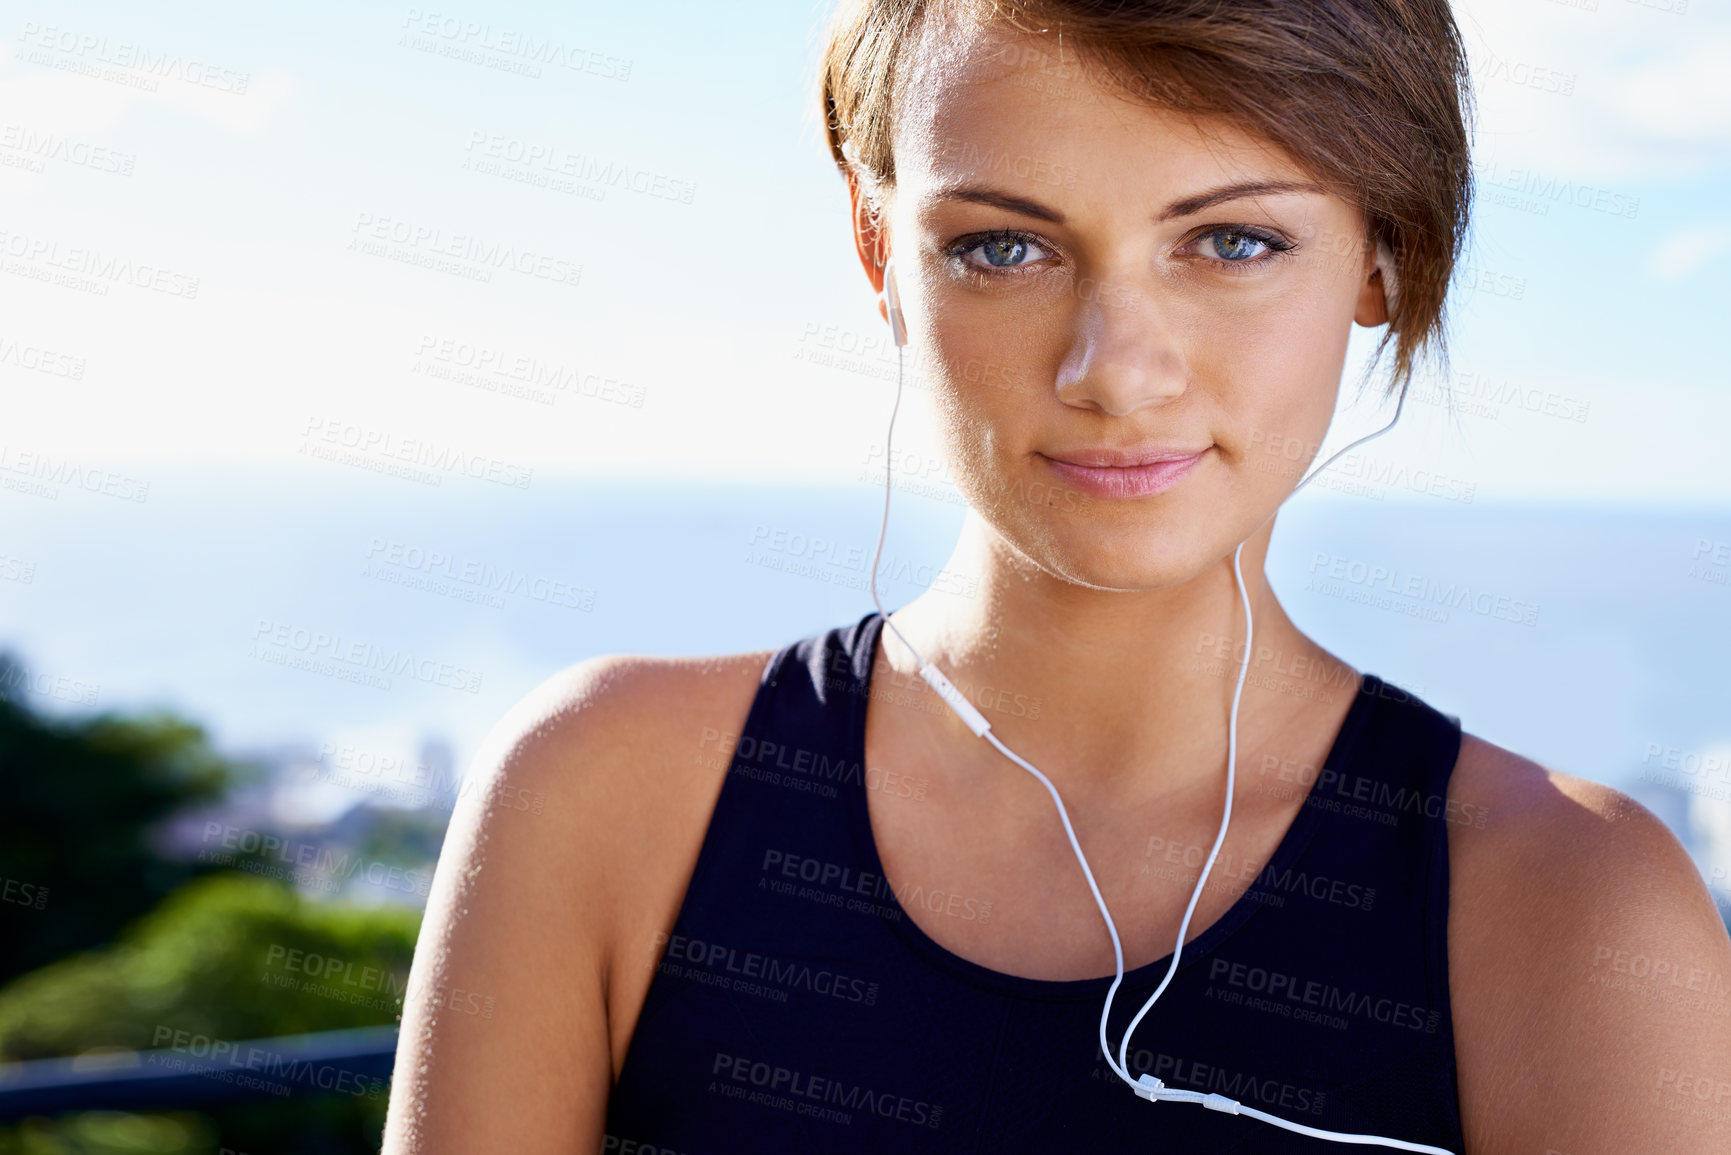 Buy stock photo Outdoor, portrait or woman ready for fitness workout, exercise or healthy wellness in nature park. Sky, listening or face of female sports person on training break with confidence, music or earphones